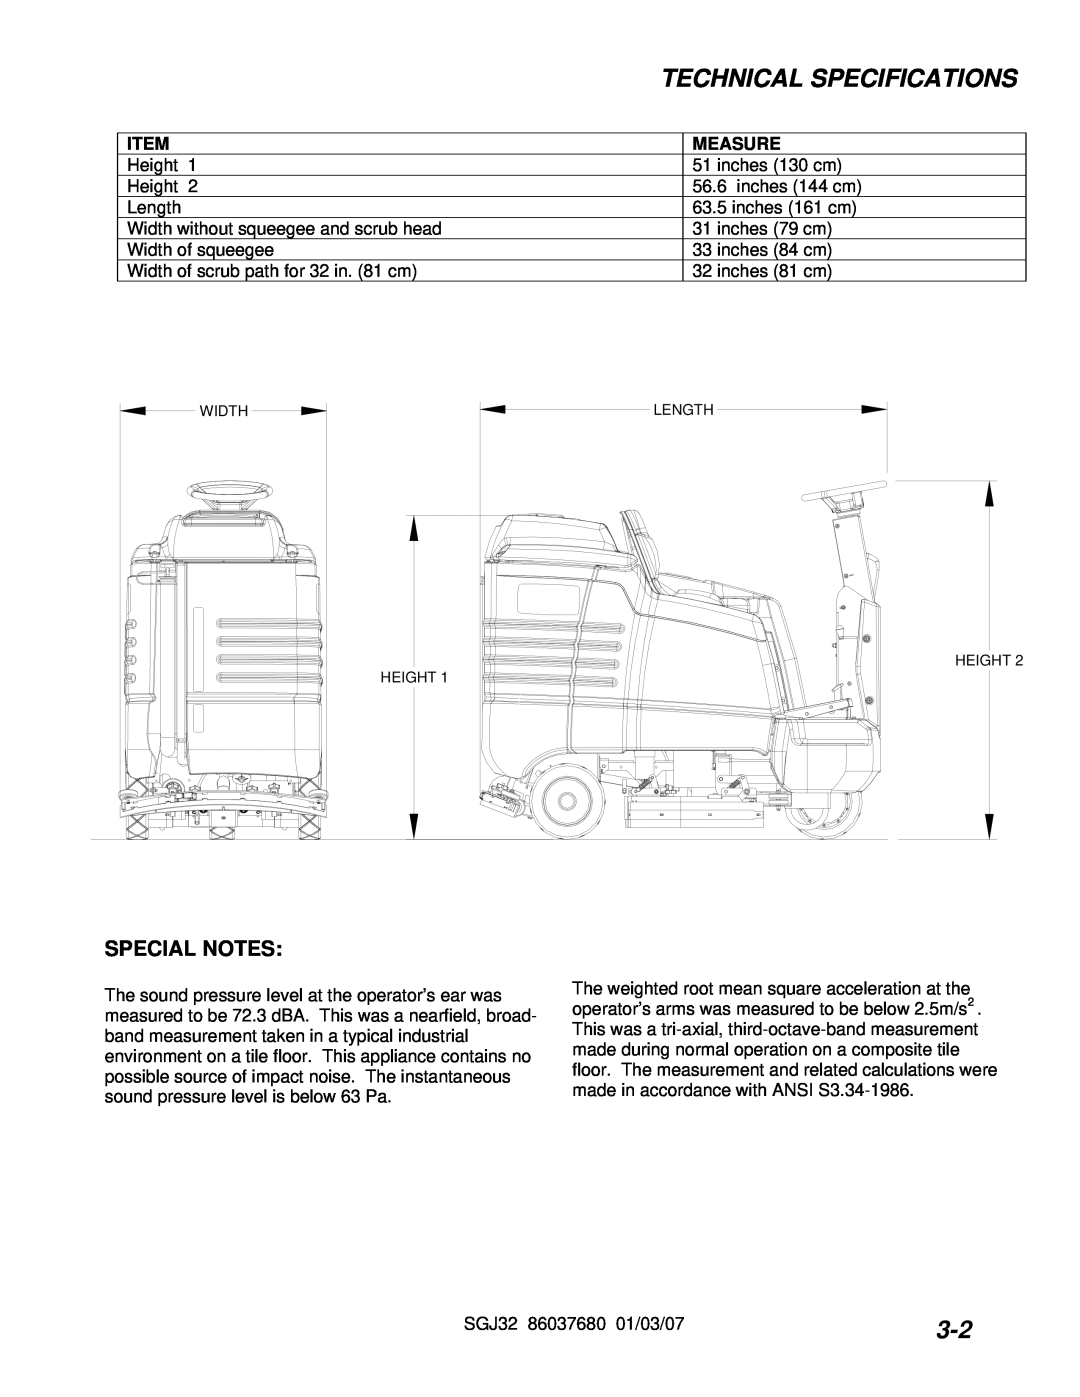 Windsor 10052530, SGJ32 operating instructions Special Notes, Technical Specifications, Measure 